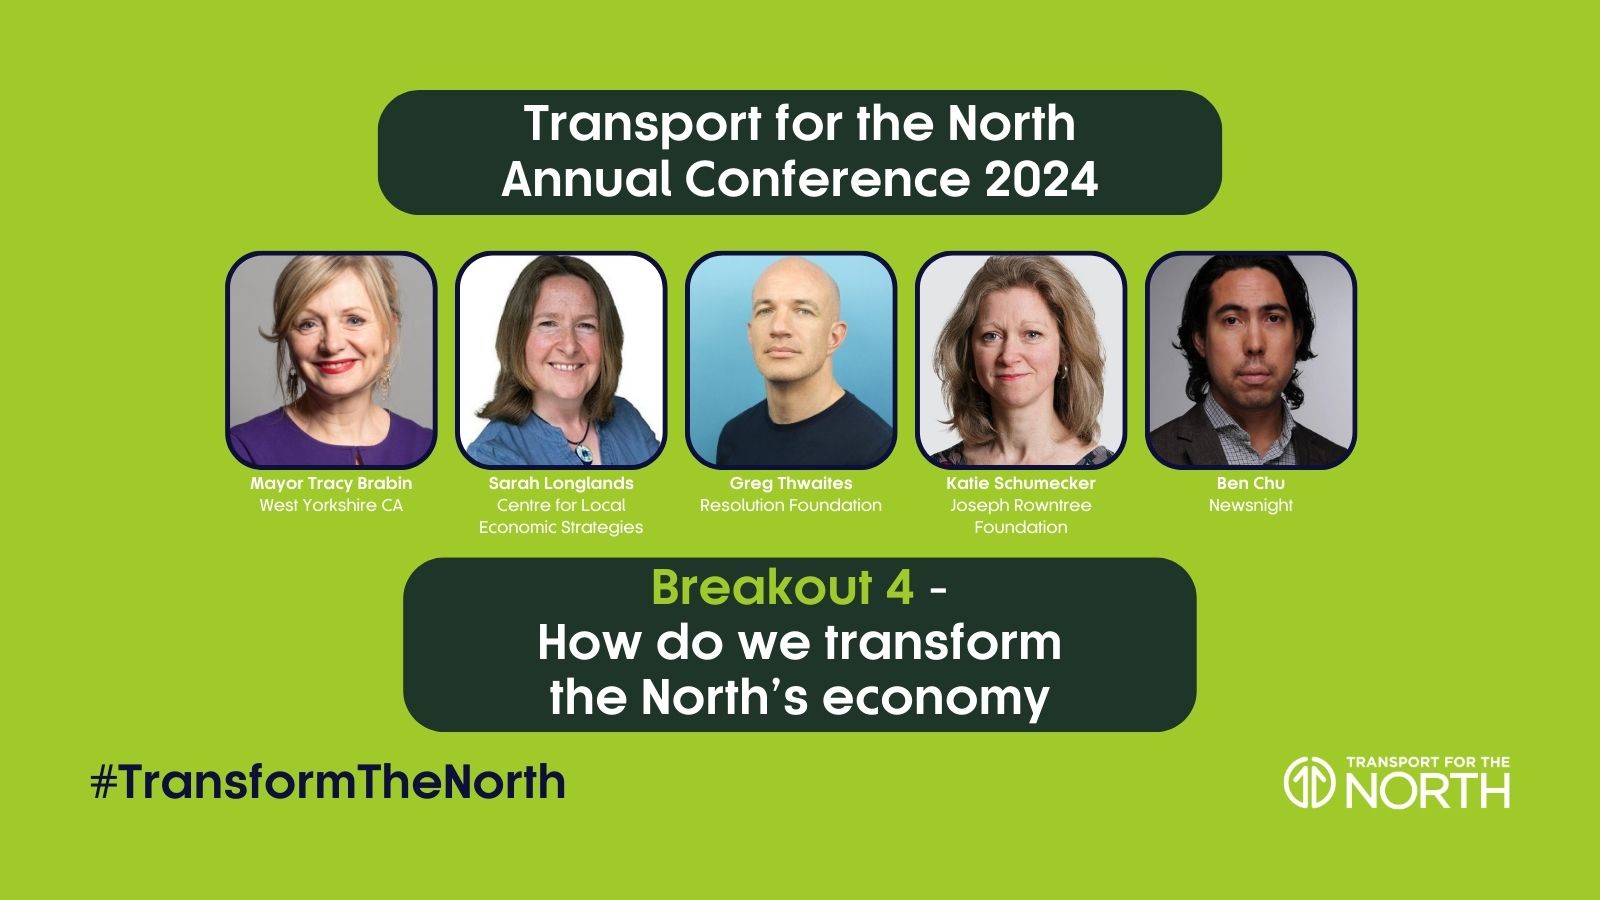 Breakout 4 - How do we transform the North’s economy?